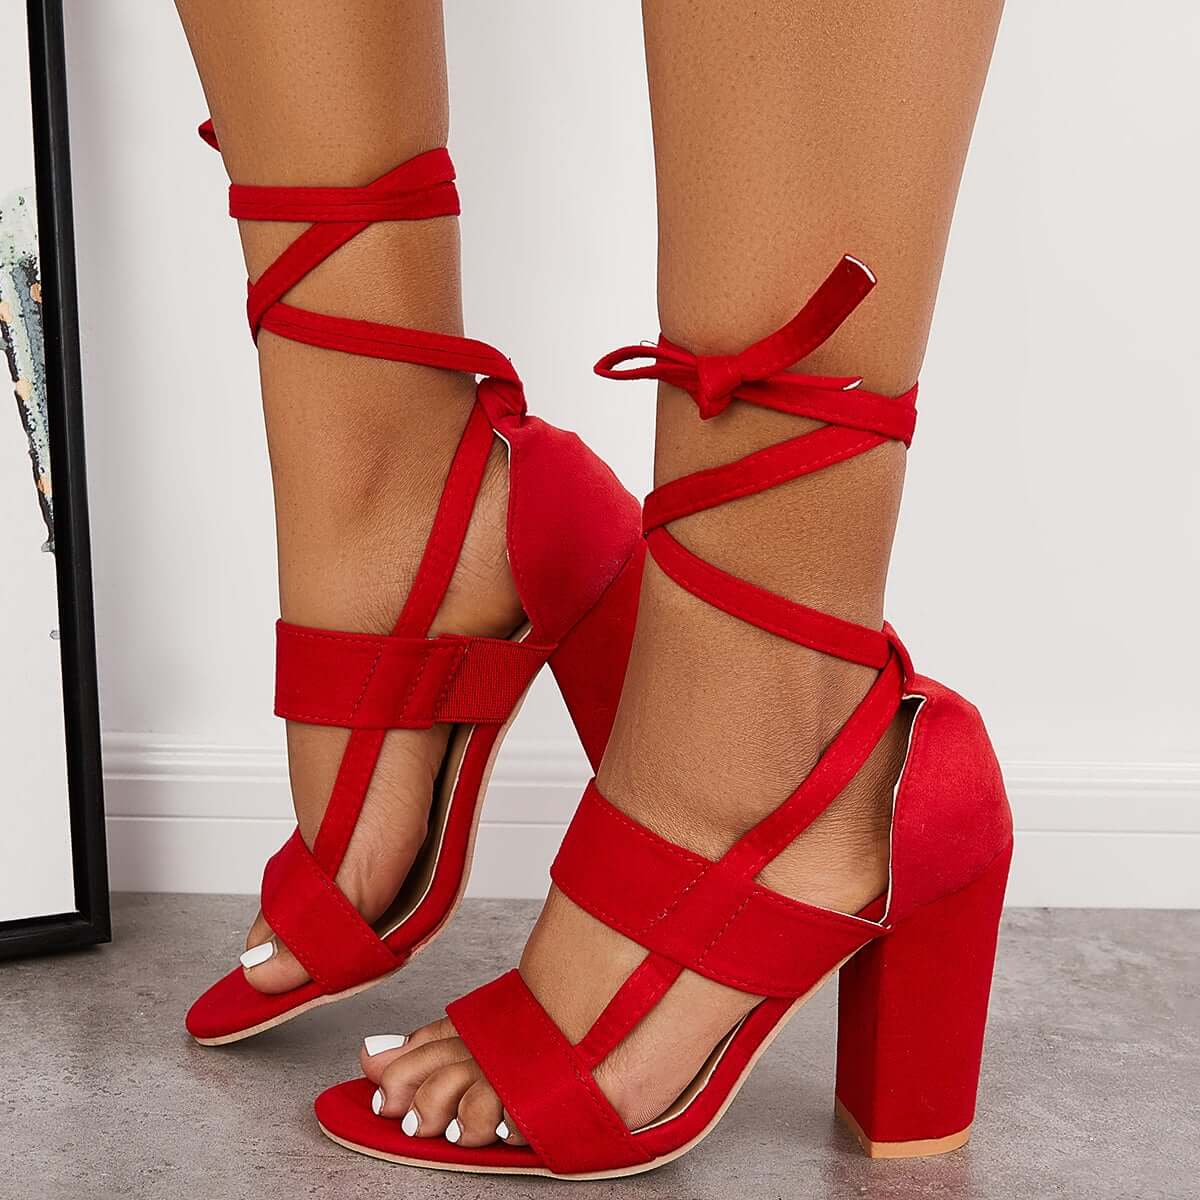 Veooy Lace Up Chunky Block High Heel Sandals Ankle Strap Dress Heels